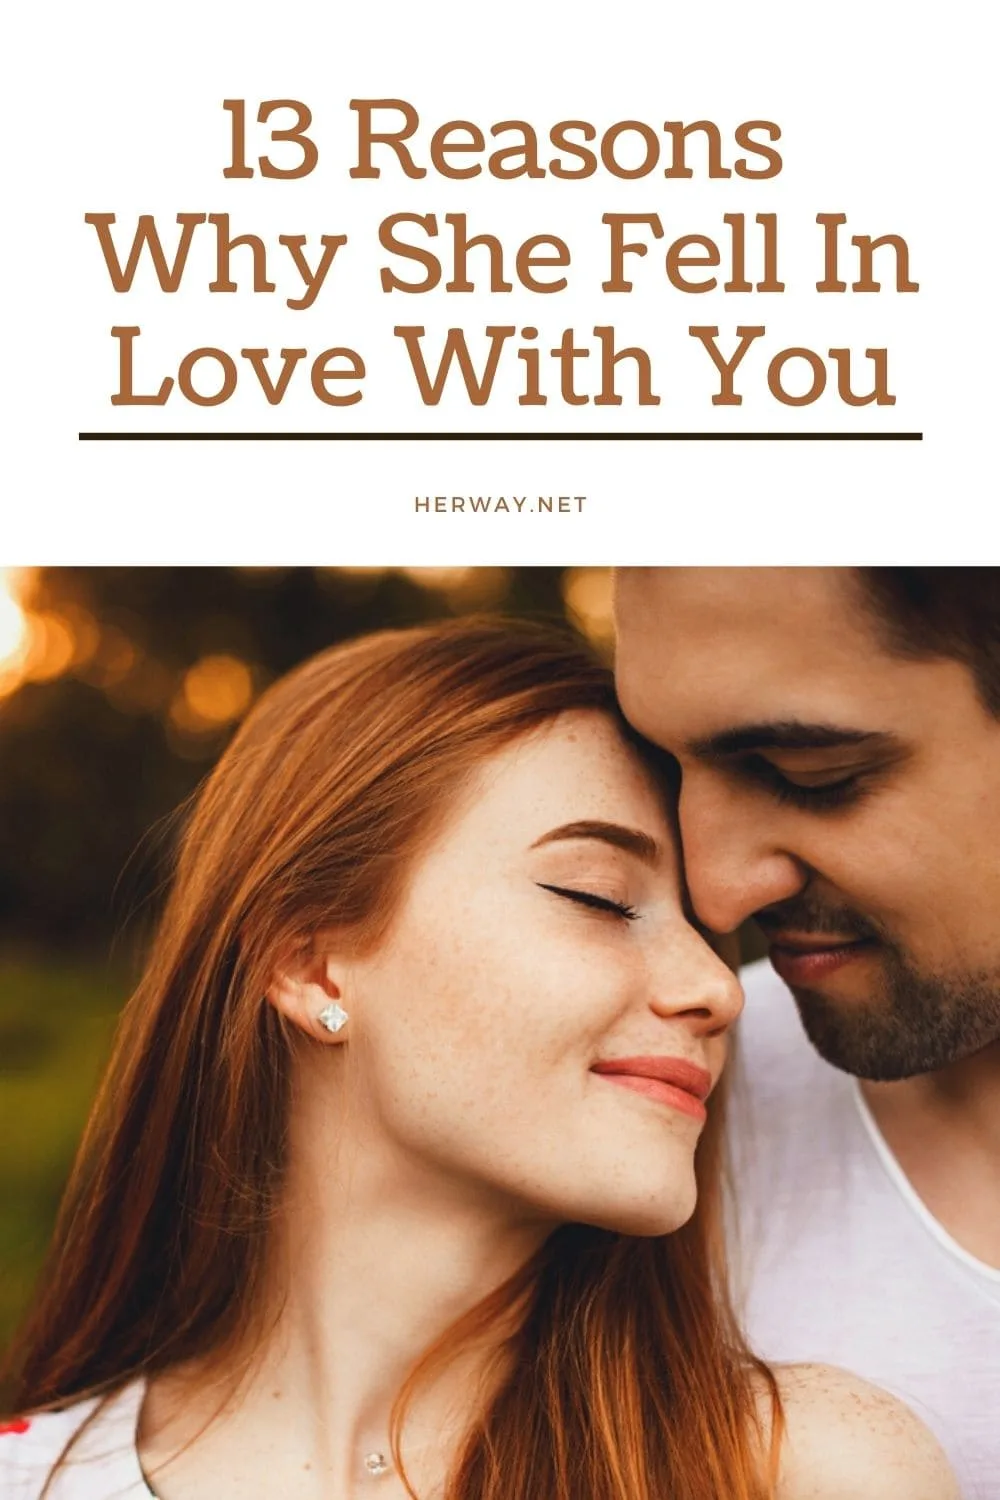 13 Reasons Why She Fell In Love With You